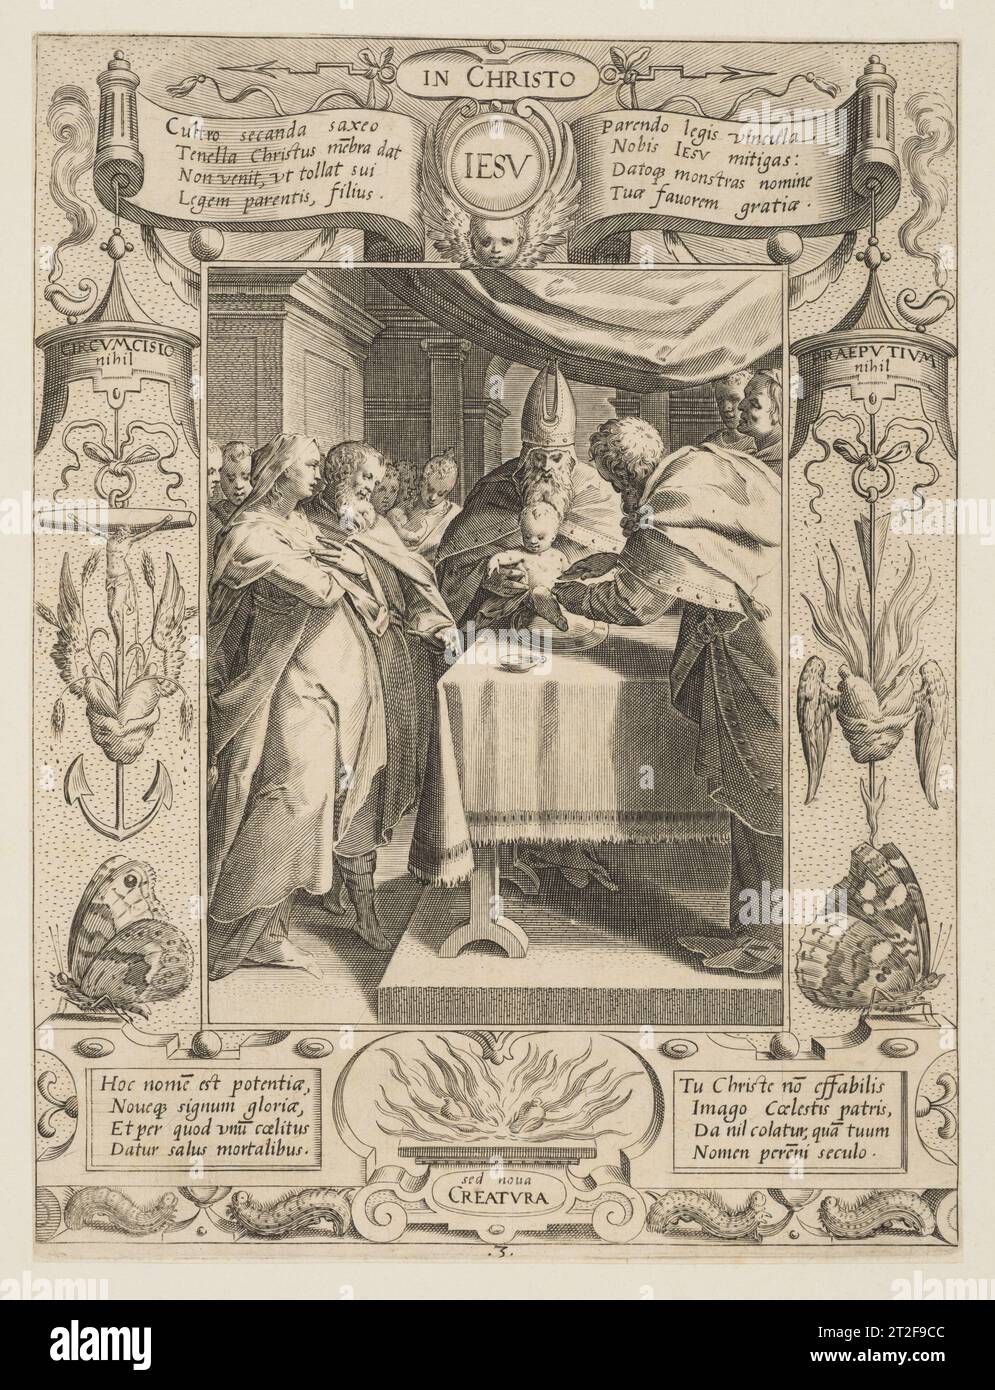 Circumcision Aegidius Sadeler II Netherlandish After Hans von Aachen German After Joris Hoefnagel Netherlandish 1590 This engraving is one of 13 plates from the series, Salus generis humani (Salvation of Mankind), engraved by the Netherlandish printmaker Aegidius Sadeler. Made in 1590, the engravings feature scenes from the Life of Christ after designs by Hans von Aachen. The central compositions are surrounded by emblematic borders, whose designs originate from illuminations in the missal (Missale romanum) made by Joris Hoefnagel in 1581–90 for Ferdinand II, Archduke of Austria, now in the Au Stock Photo